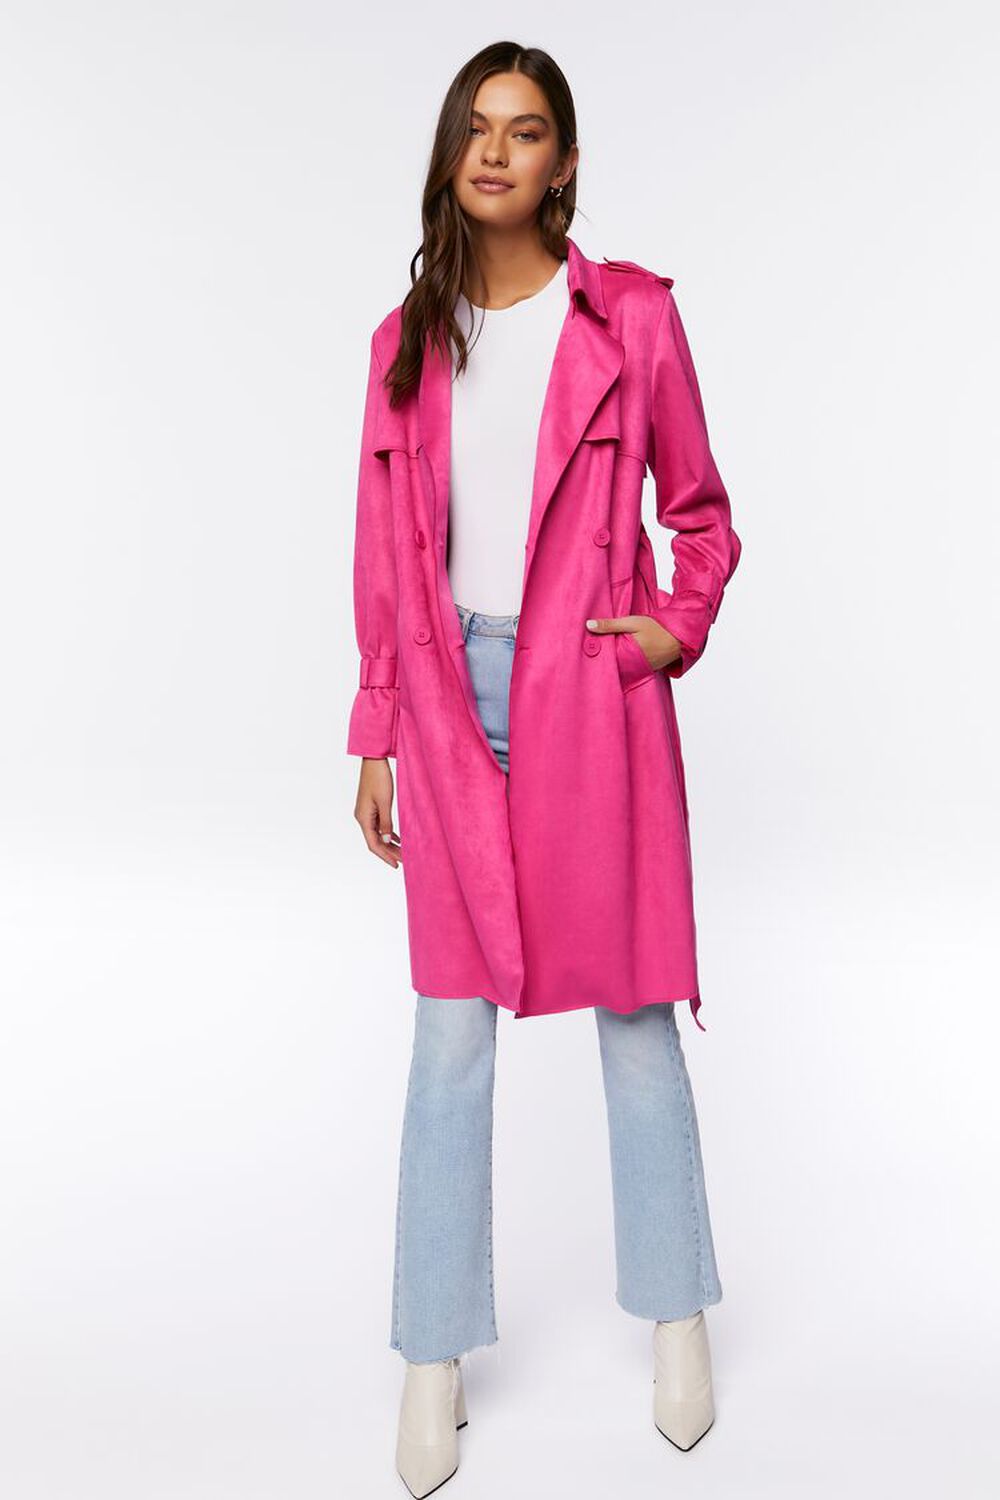 BERRY Belted Faux Suede Trench Jacket, image 1